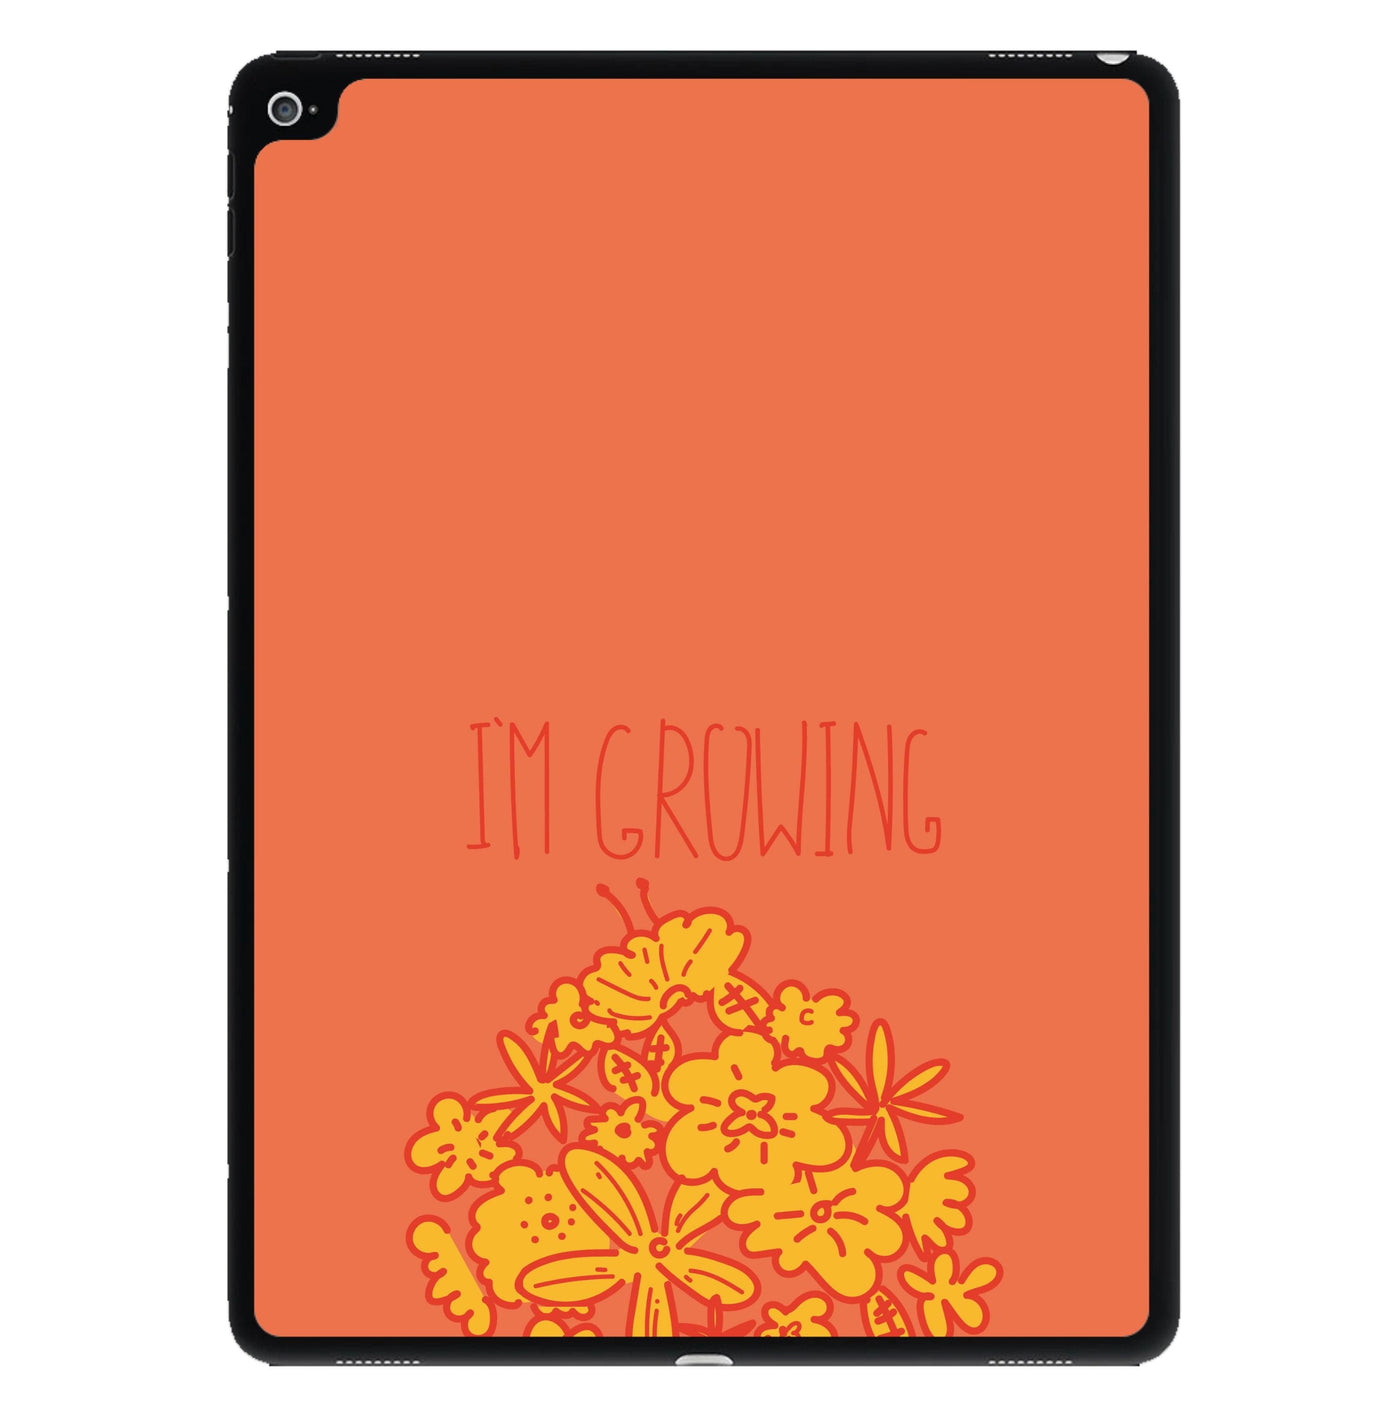 I'm Growing - Floral iPad Case